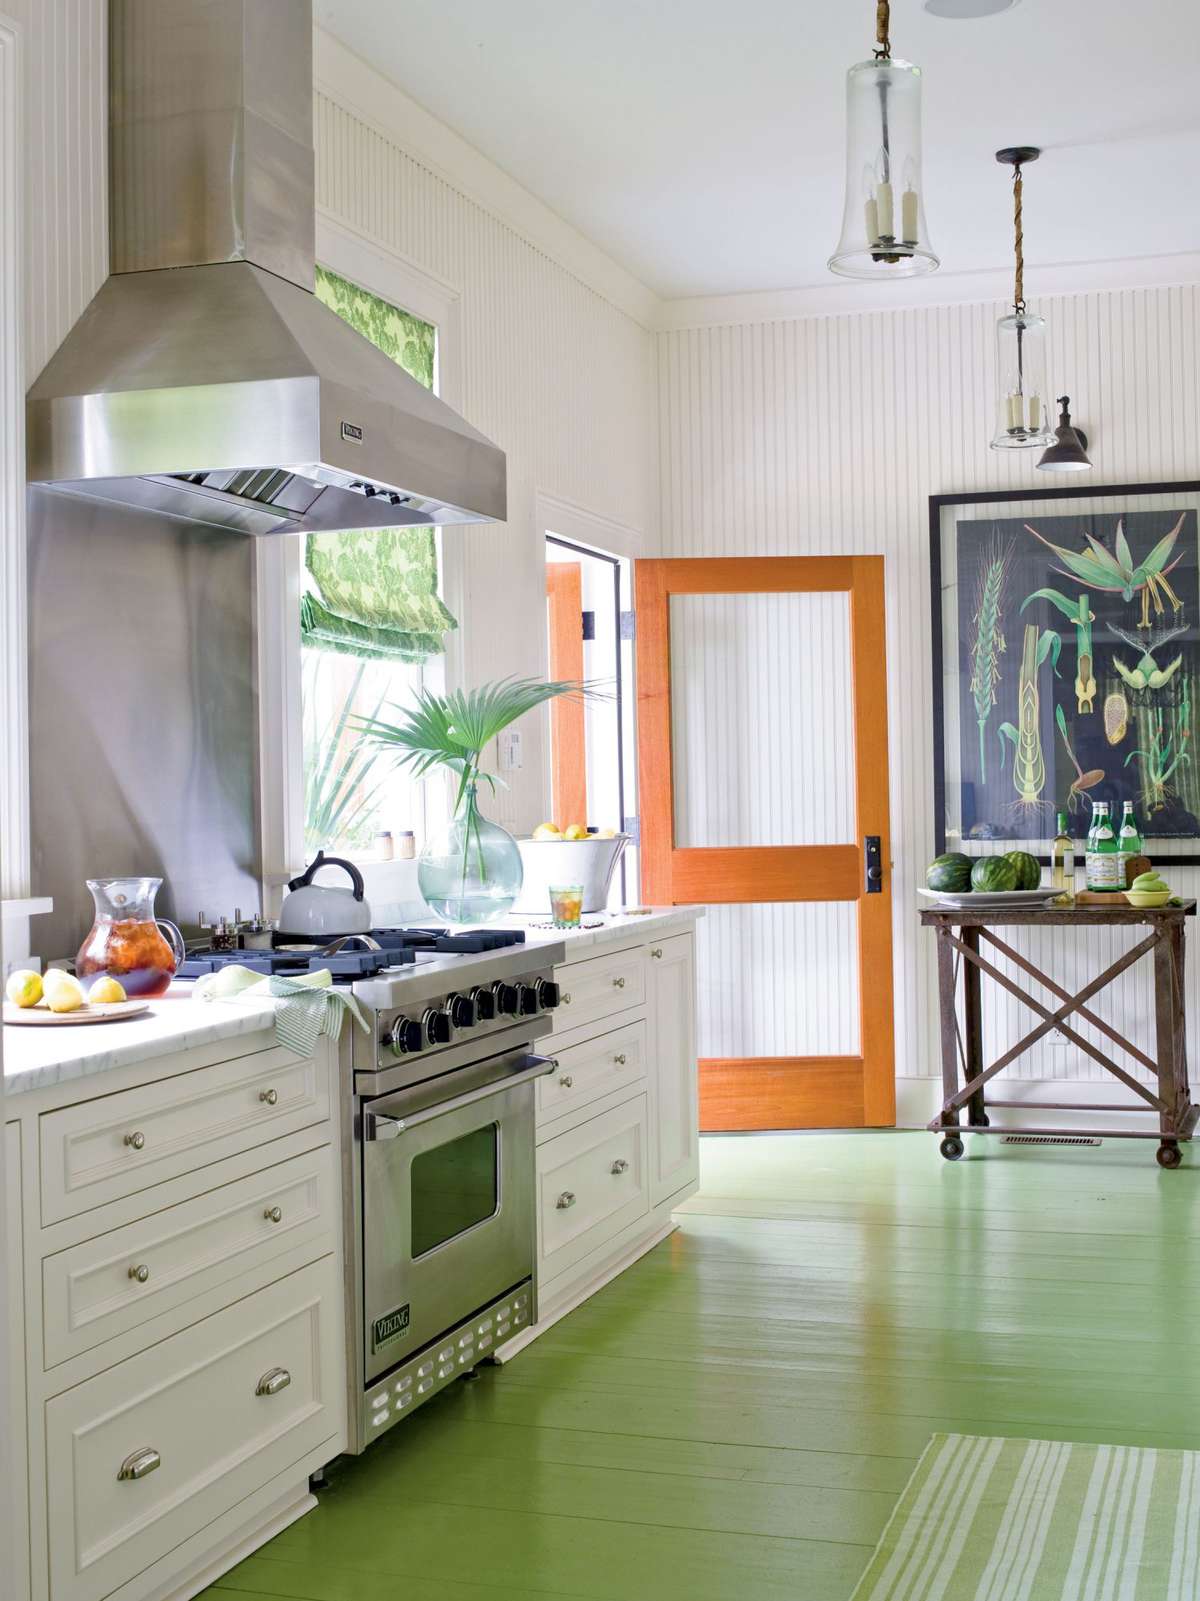 <p>The floor is painted a leafy green, which will give an even more weathered, beachy feel to the kitchen when the boards start to show through. Vintage-inspired beaded board lends even more character to the room while the white keeps it fresh and crisp.</p>
                            